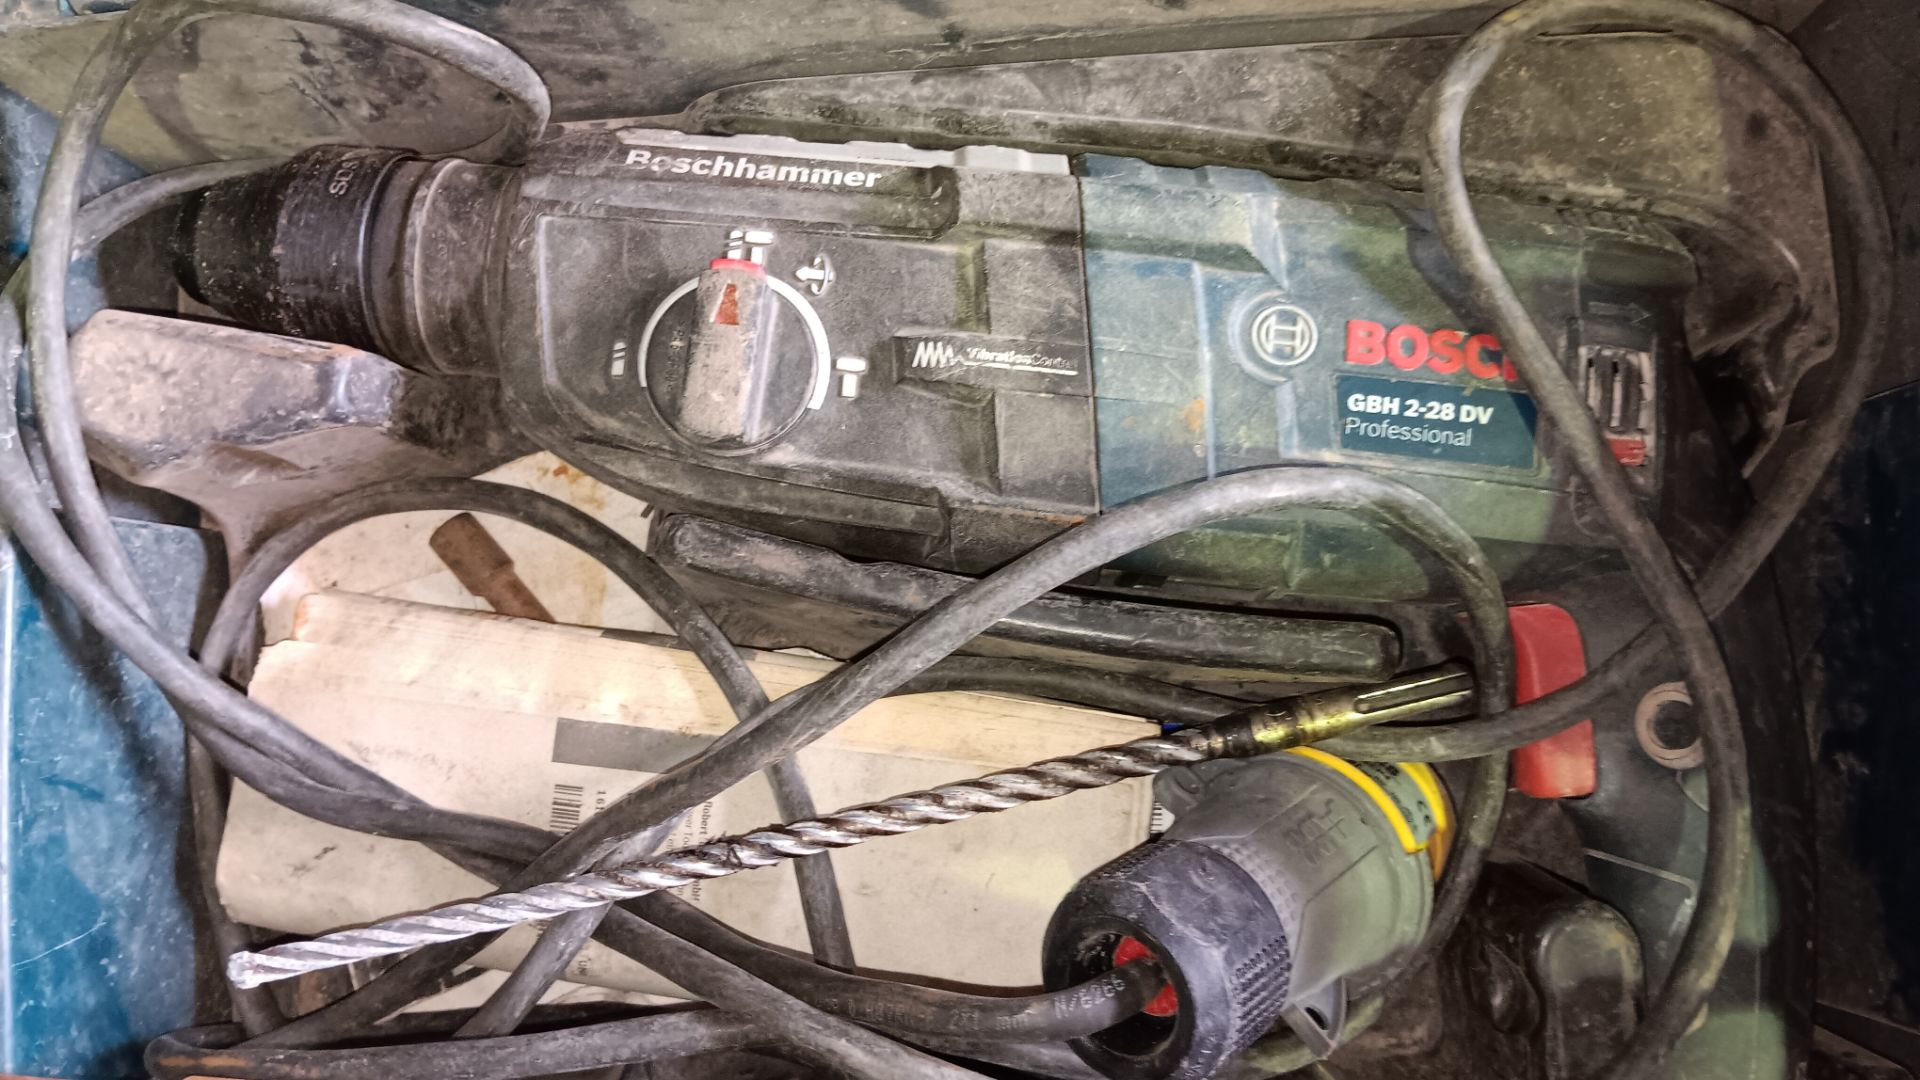 Bosch GBH2-28DV professional rotary hammer drill with case, 110v, serial number 209000074 (2012) - Image 2 of 4